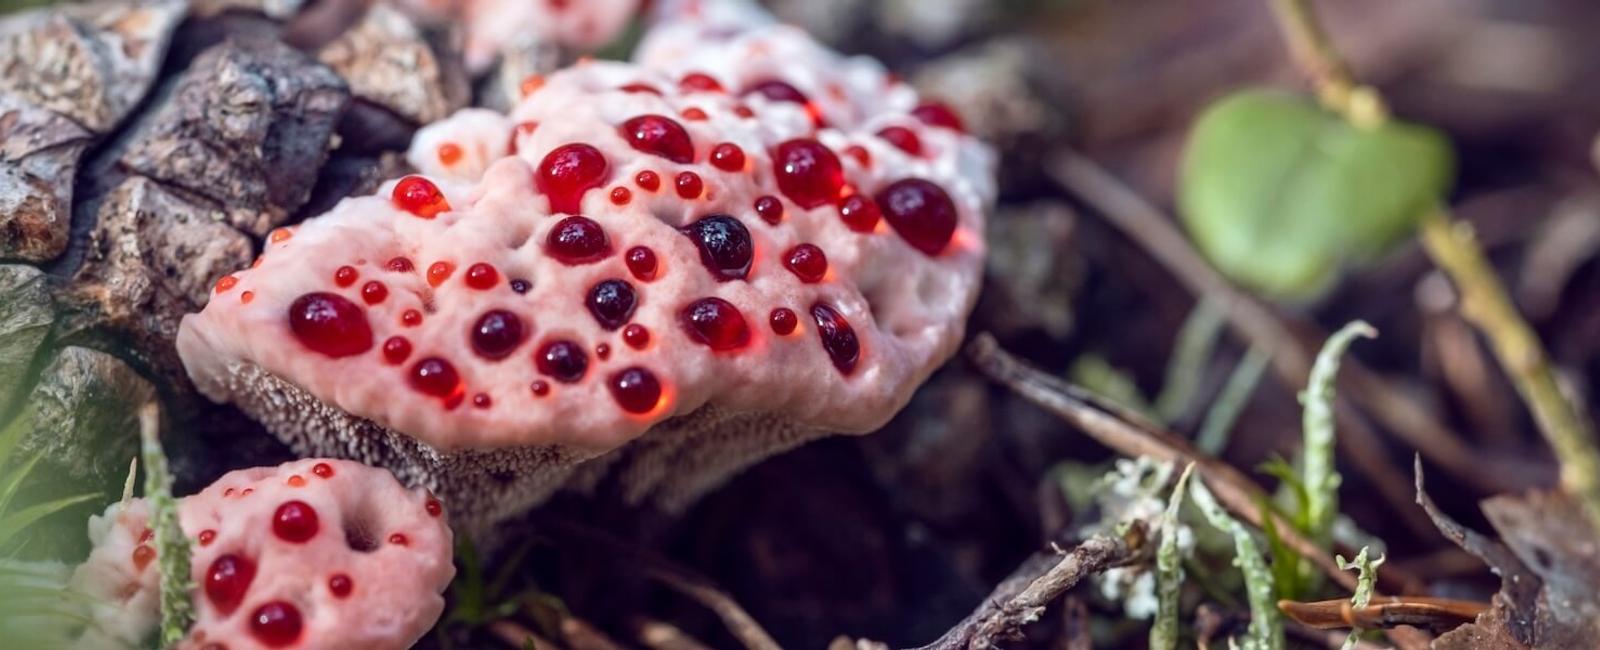 The Complete Guide to Bleeding Tooth Fungus